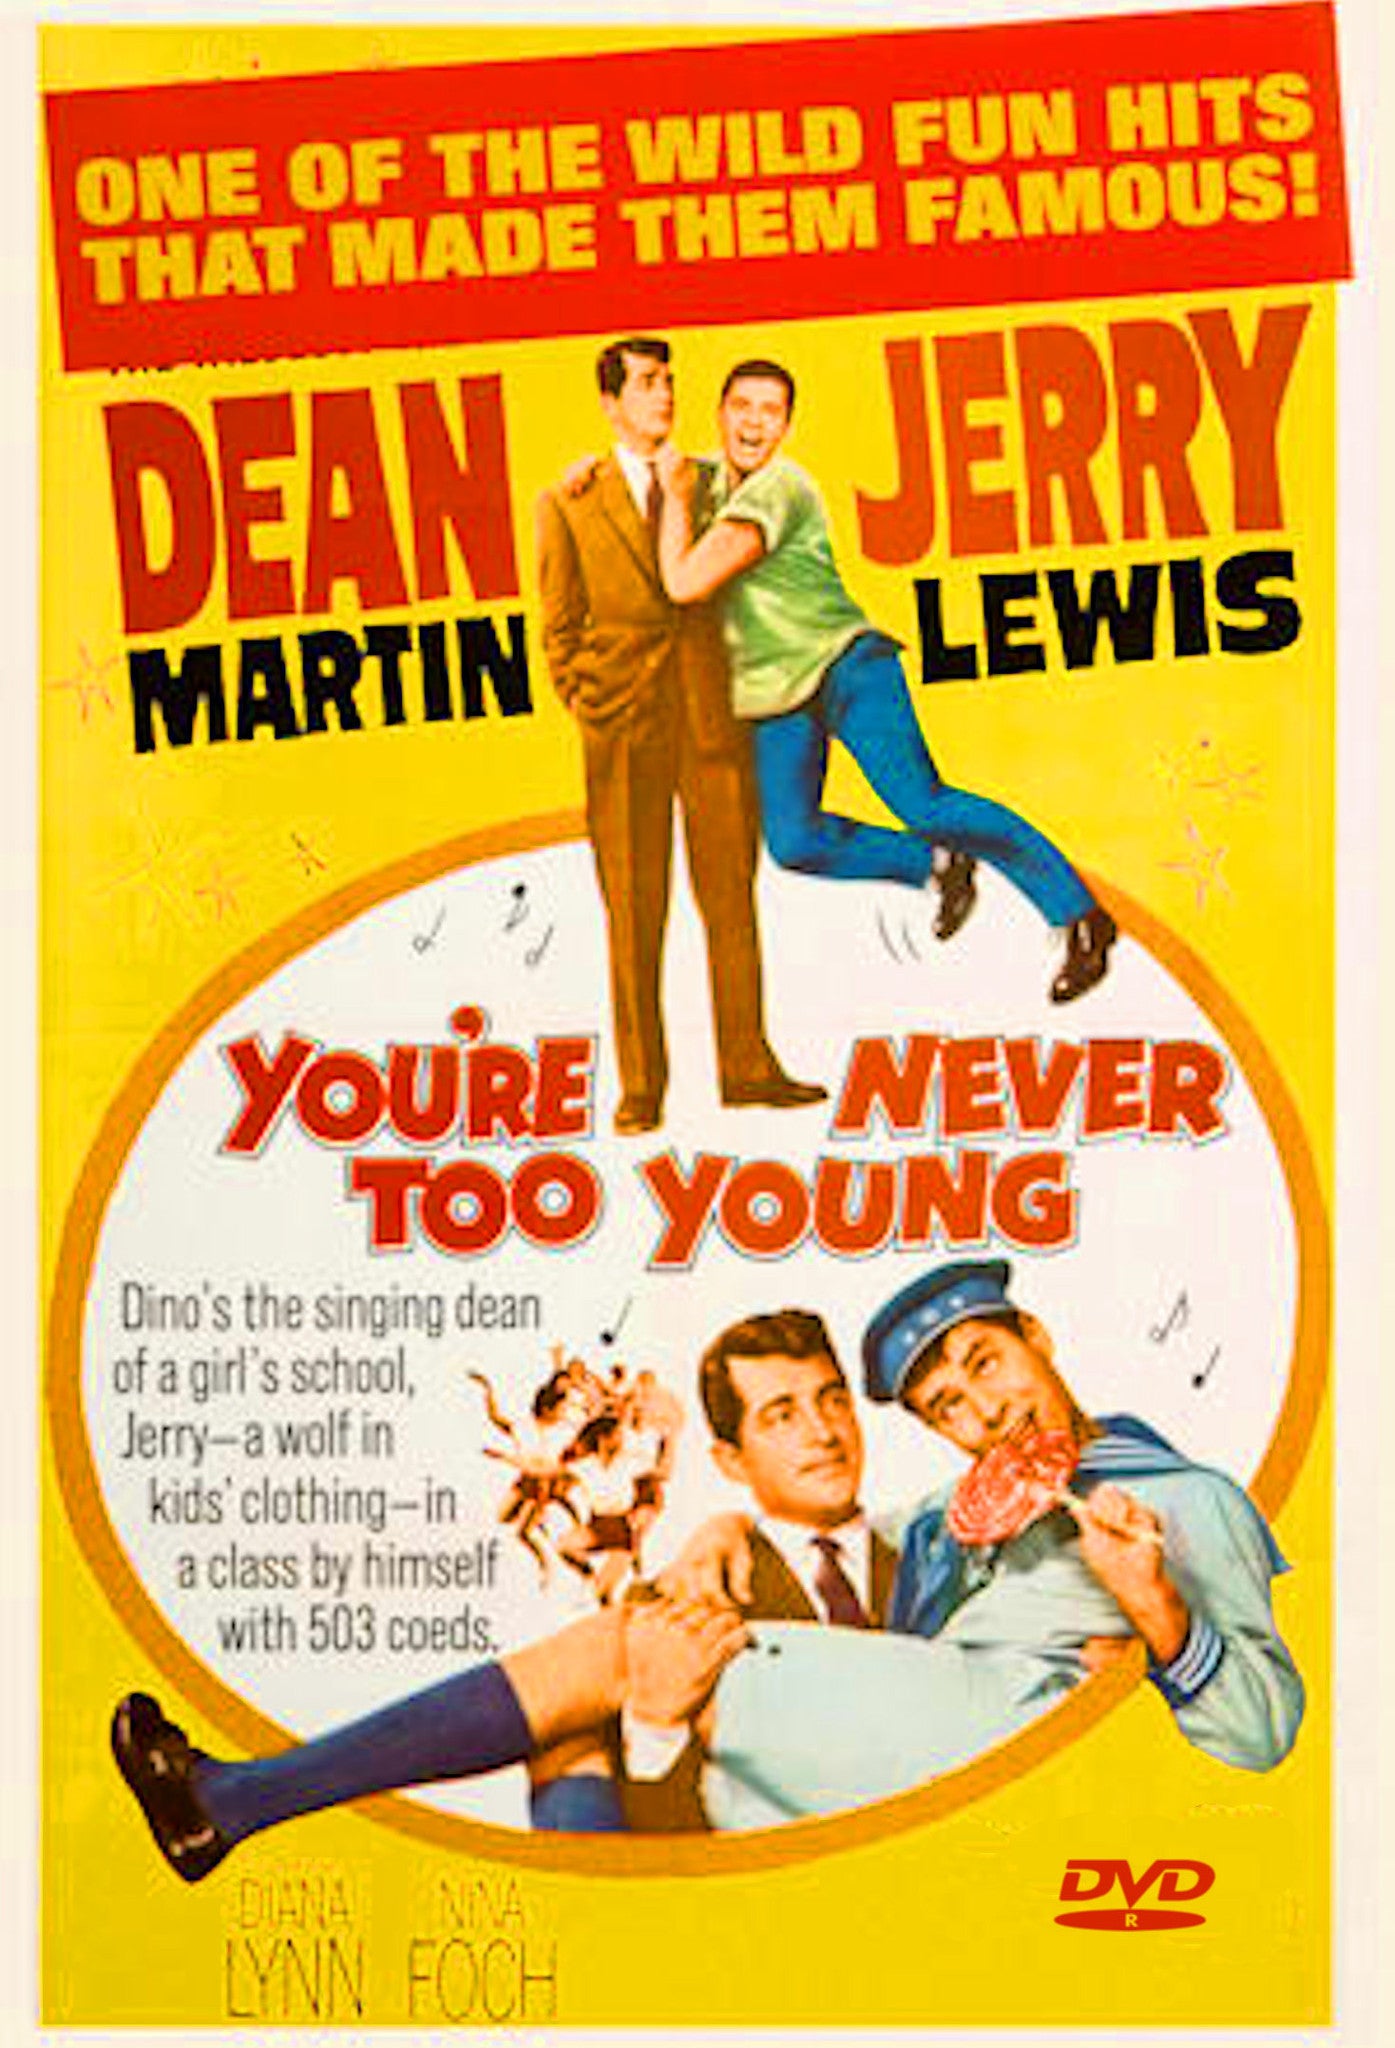 You're　DVD　Young　Dean　1955　Never　Lewis　Martin　Too　Jerry